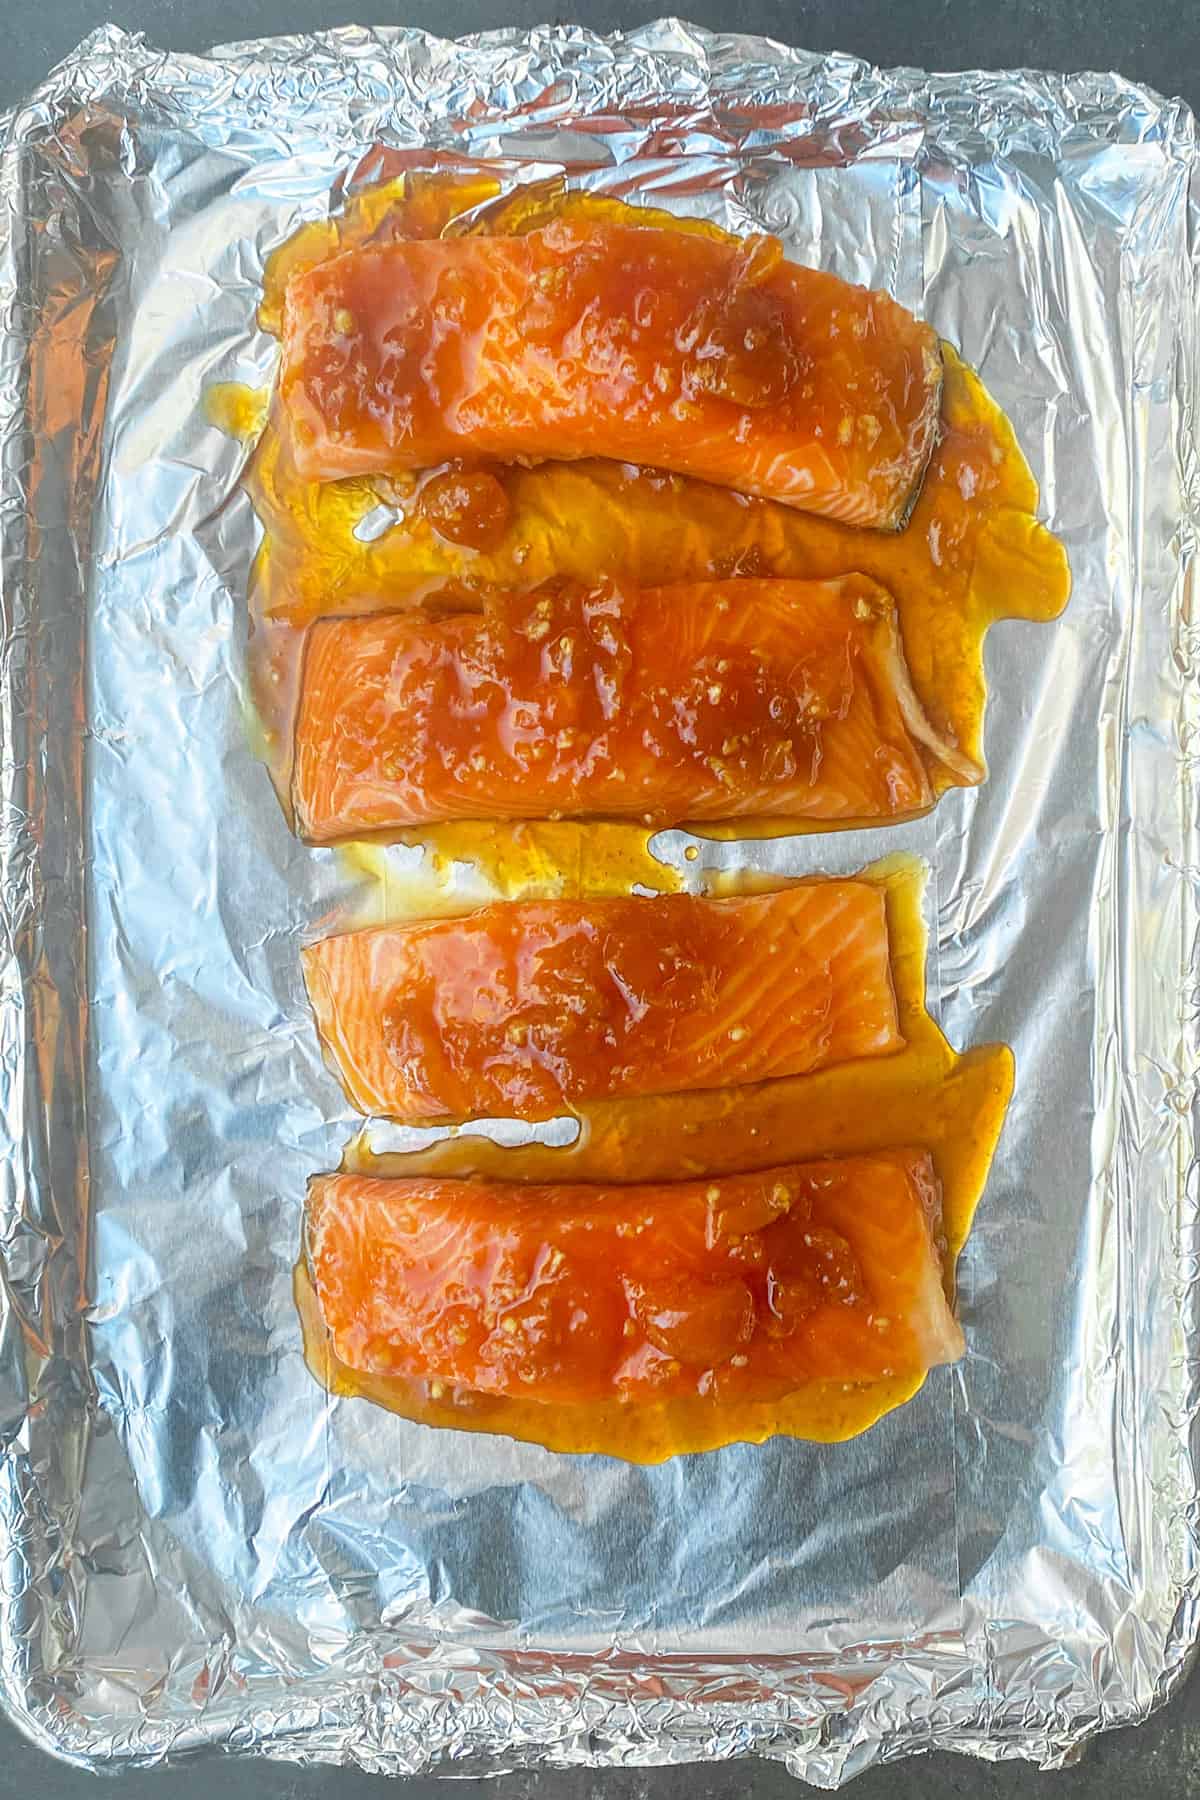 4 salmon fillets topped with apricot glaze, on a tin foil lined baking sheet, seen from above.